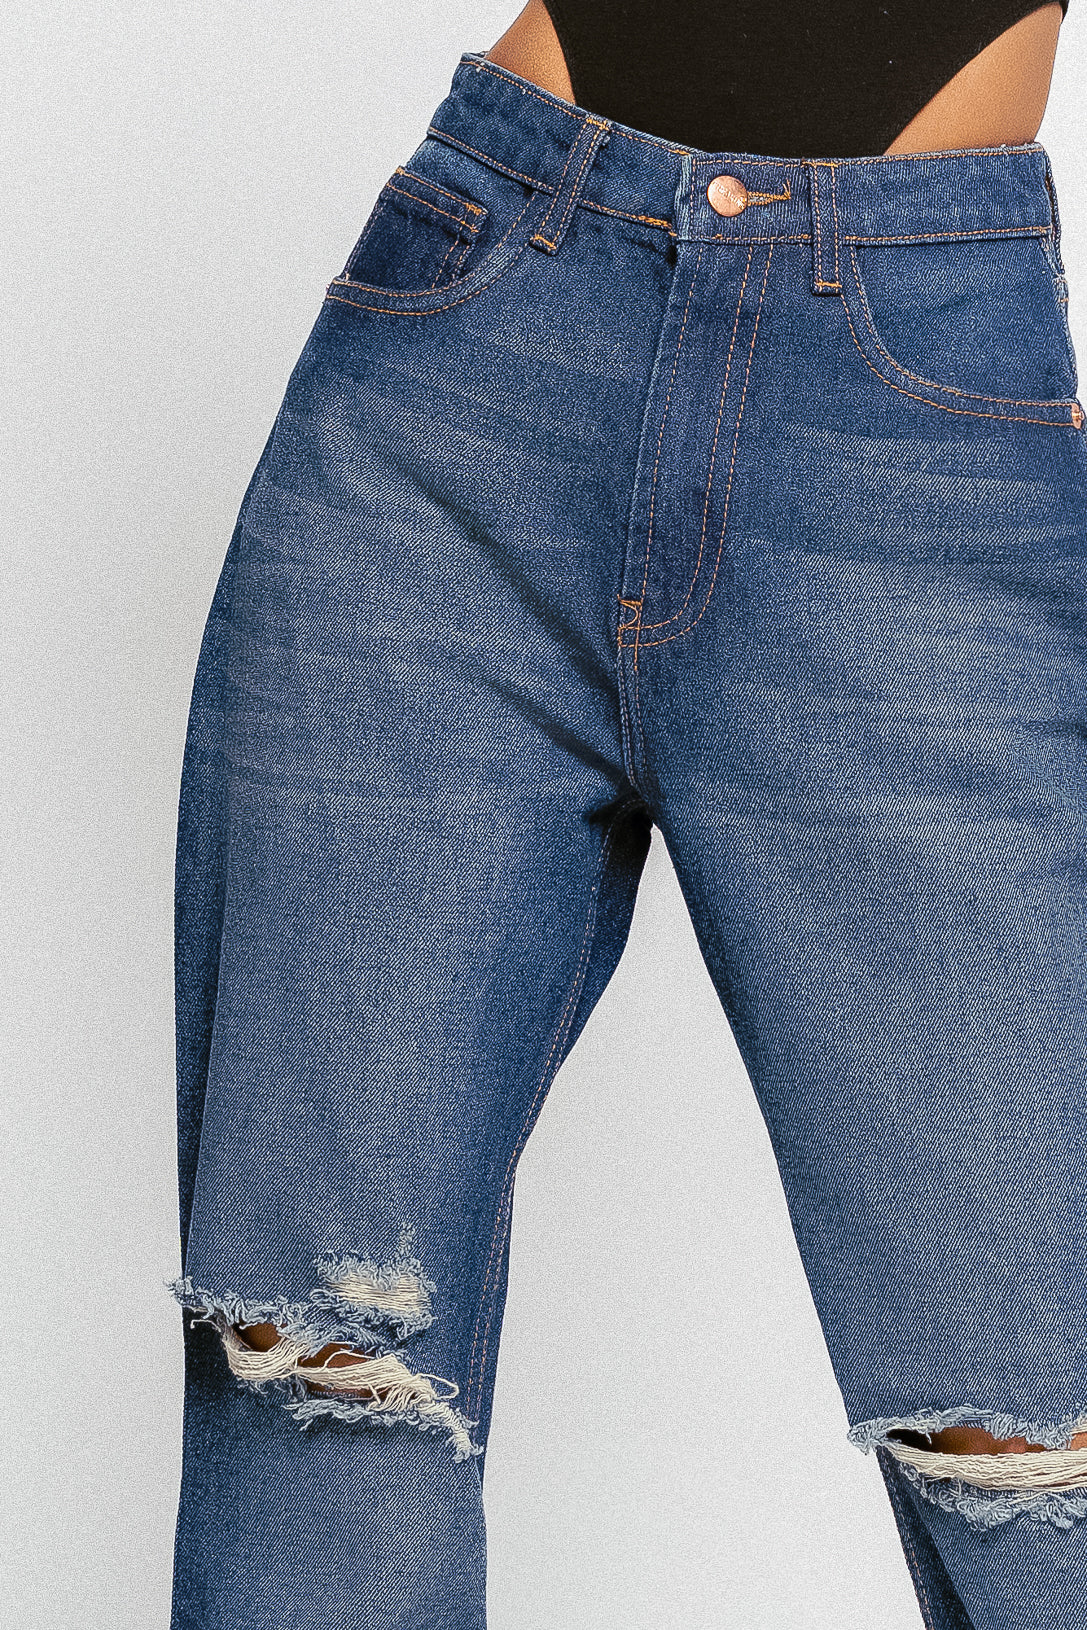 RETRO DISTRESSED BOOTCUT JEANS